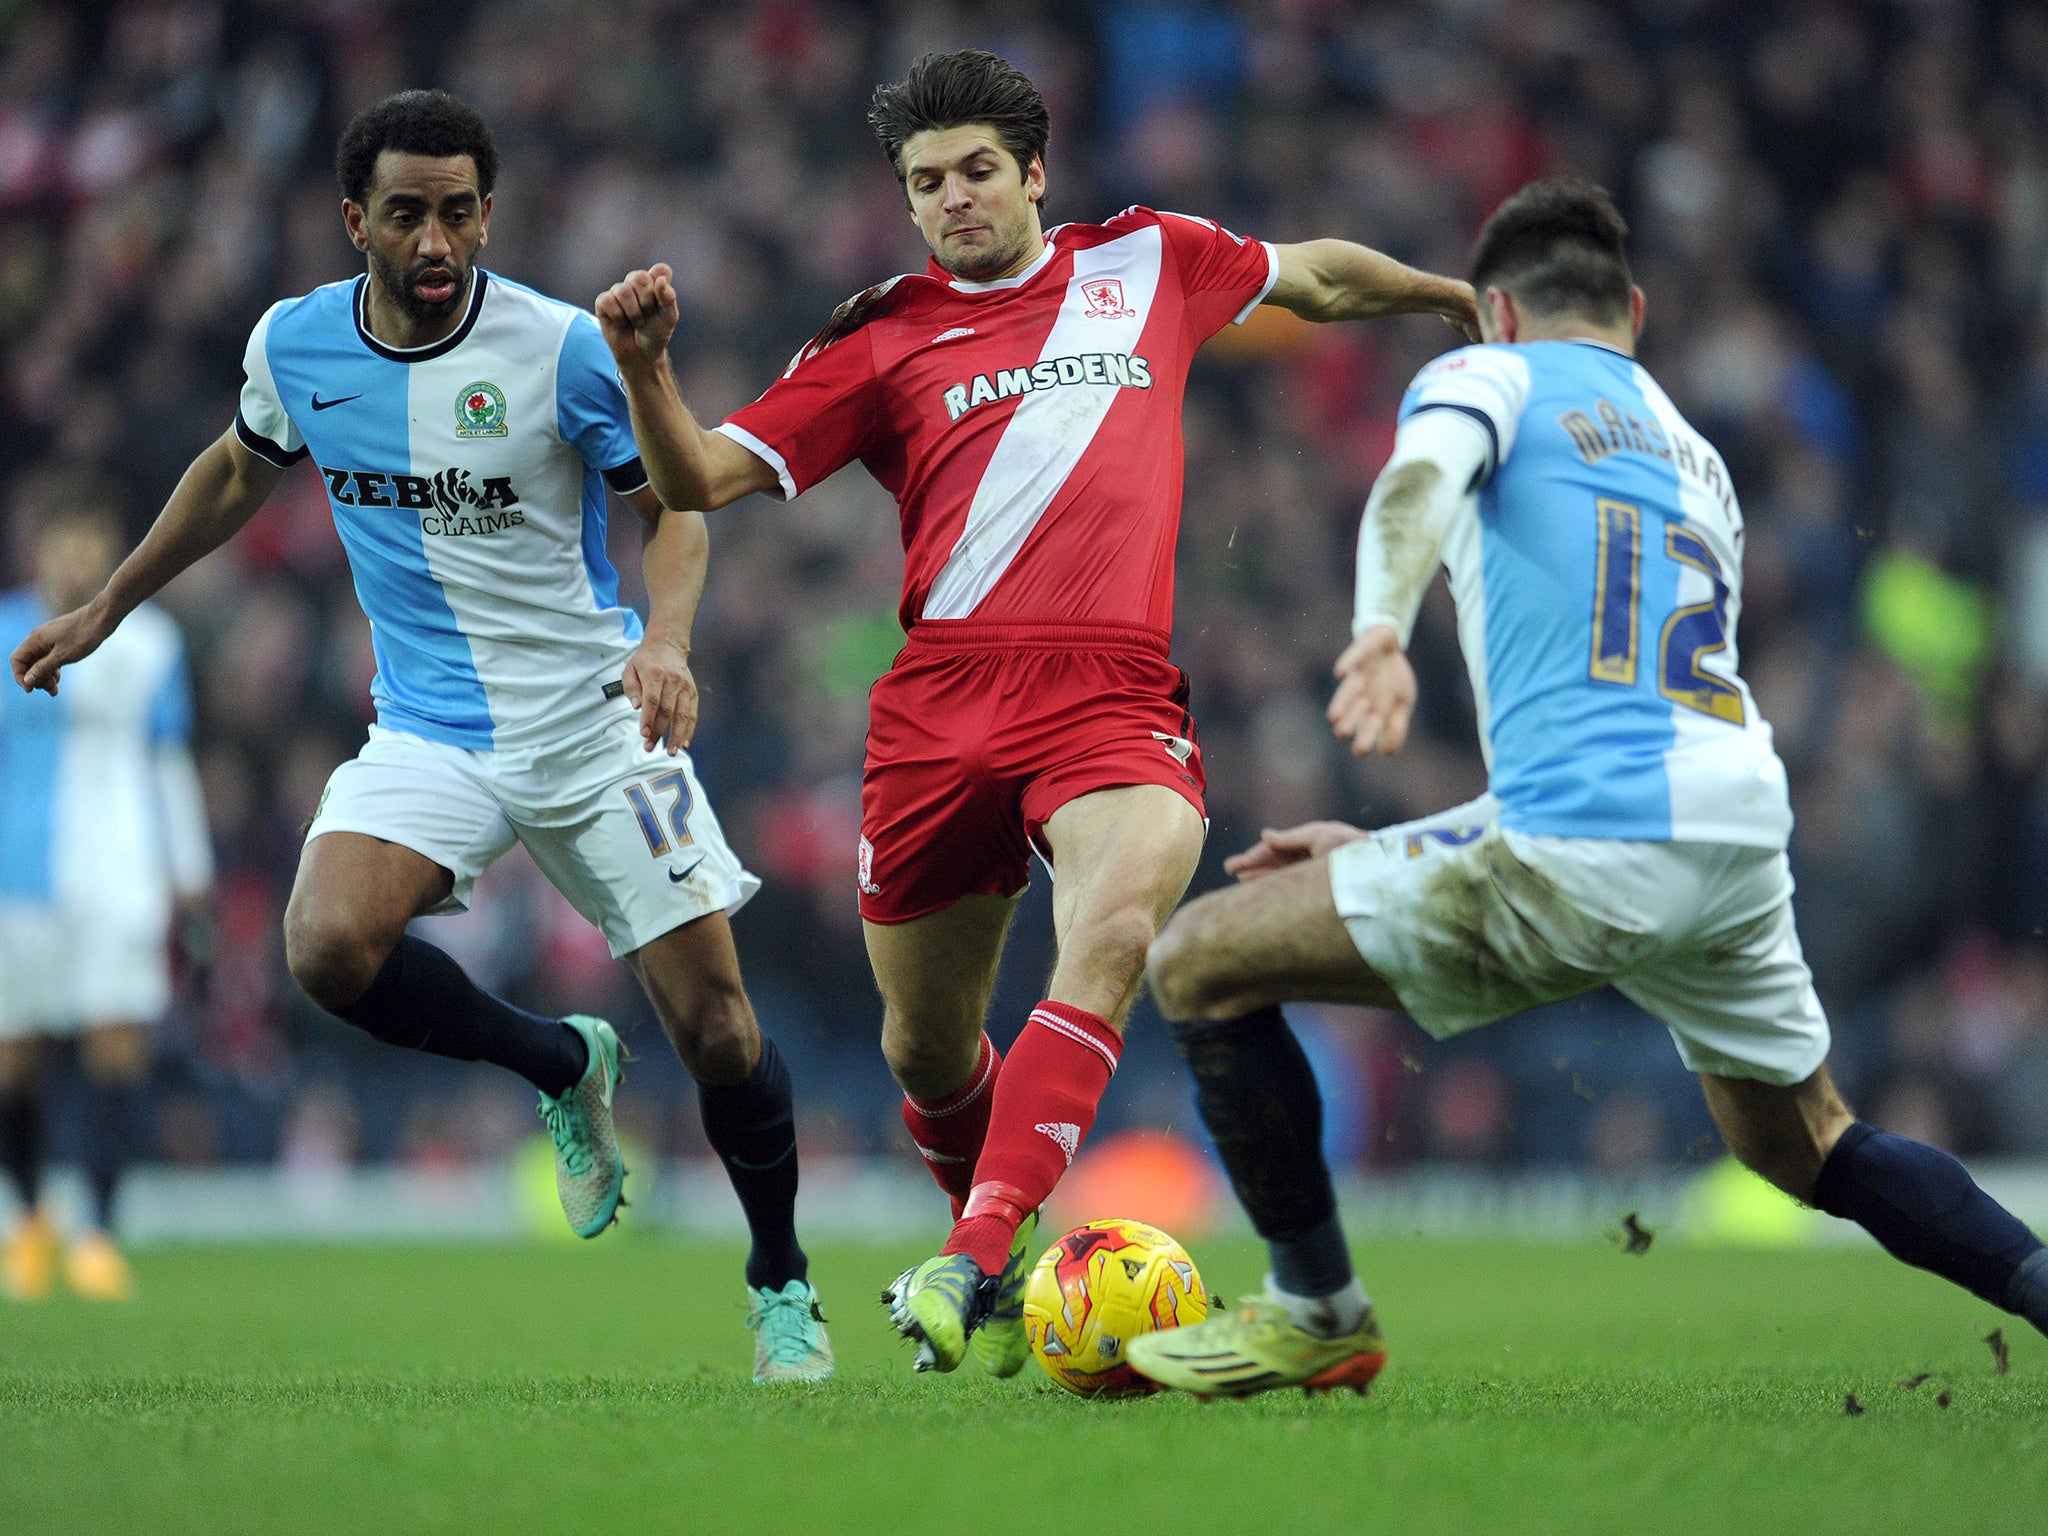 Lee Williamson (L) and Ben Marshall (R) of Blackburn Rovers tackle George Friend (C) of Middlesbrough